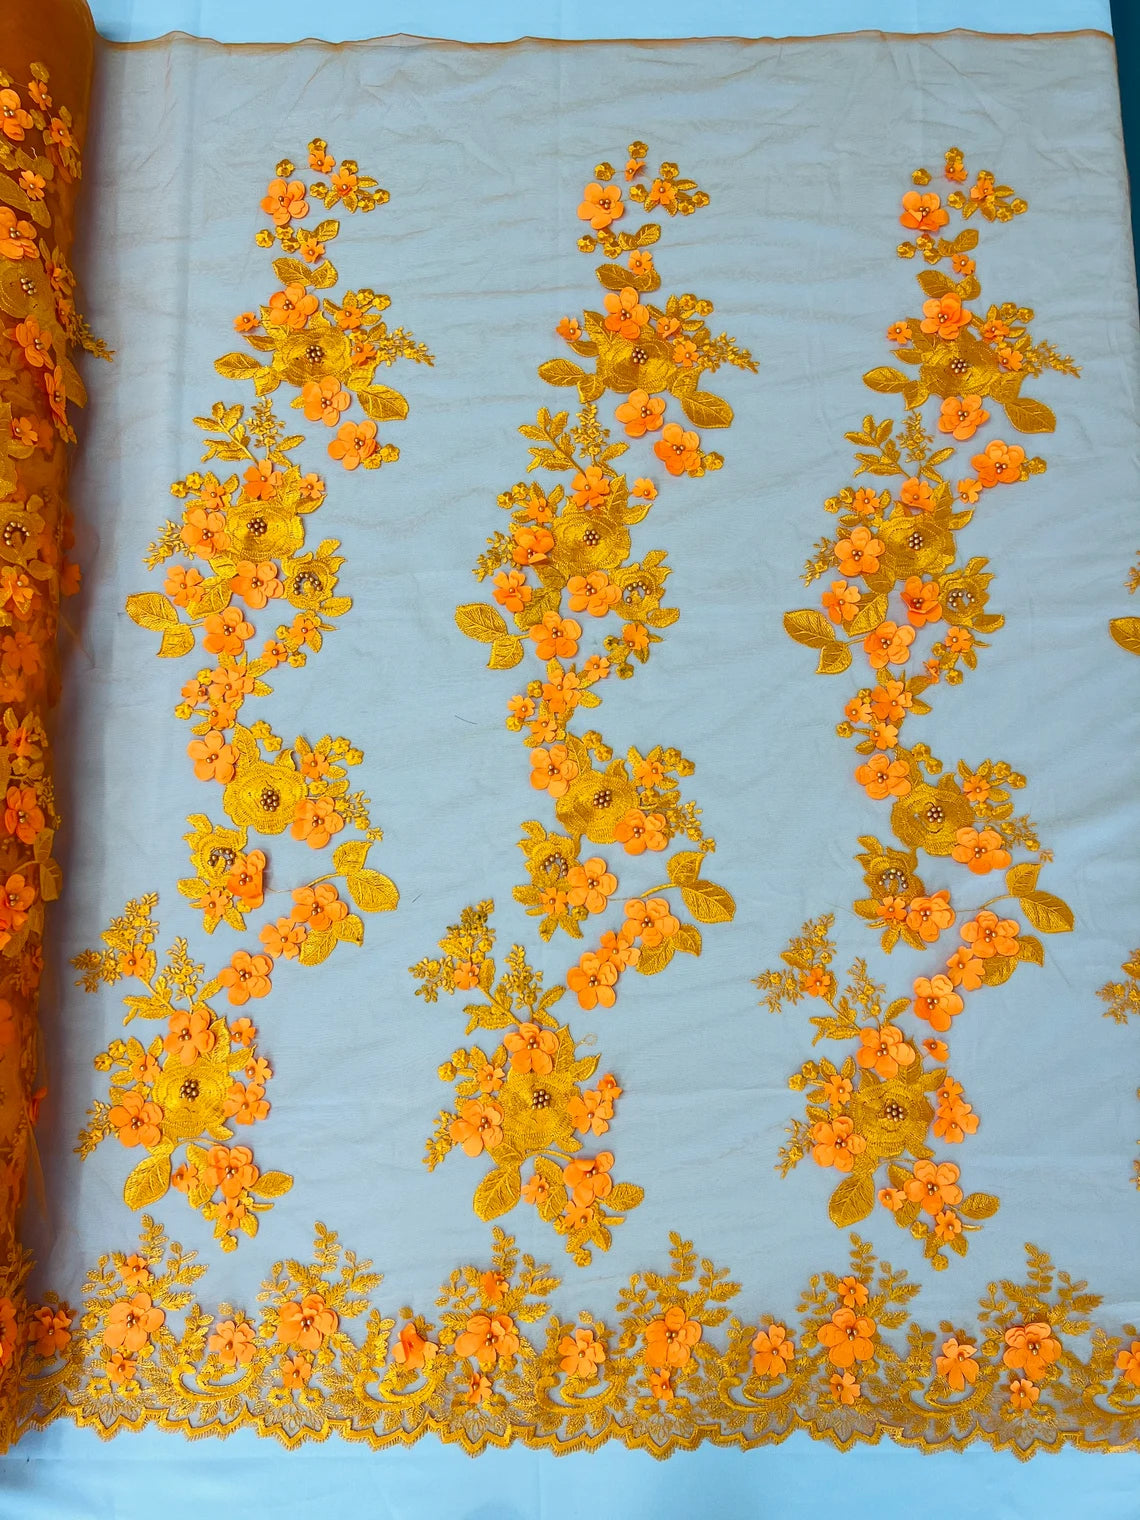 3D Flower Panels Fabric - Orange - Flower Panels Bead Embroidered on Lace Fabric Sold By Yard